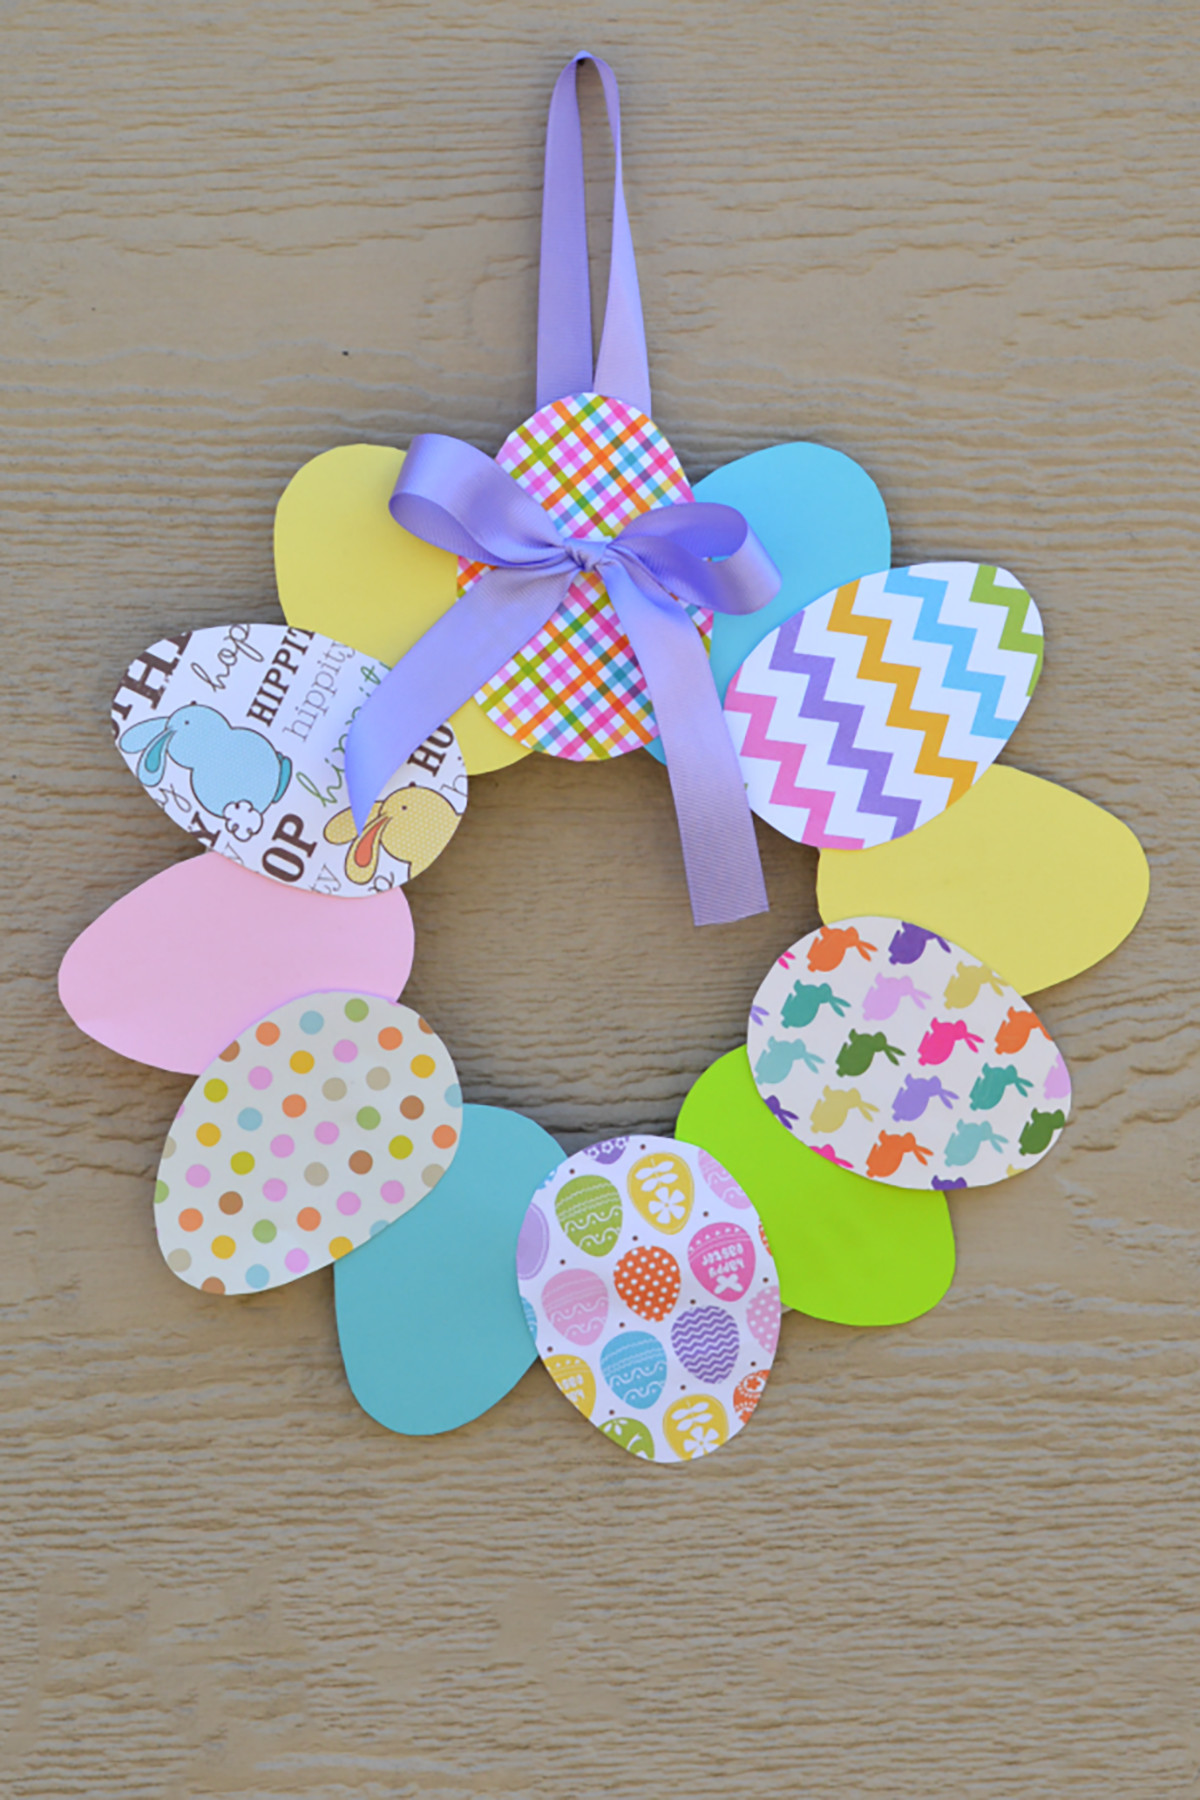 Pinterest Easter Crafts
 40 Easter Crafts for Kids Fun DIY Ideas for Kid Friendly